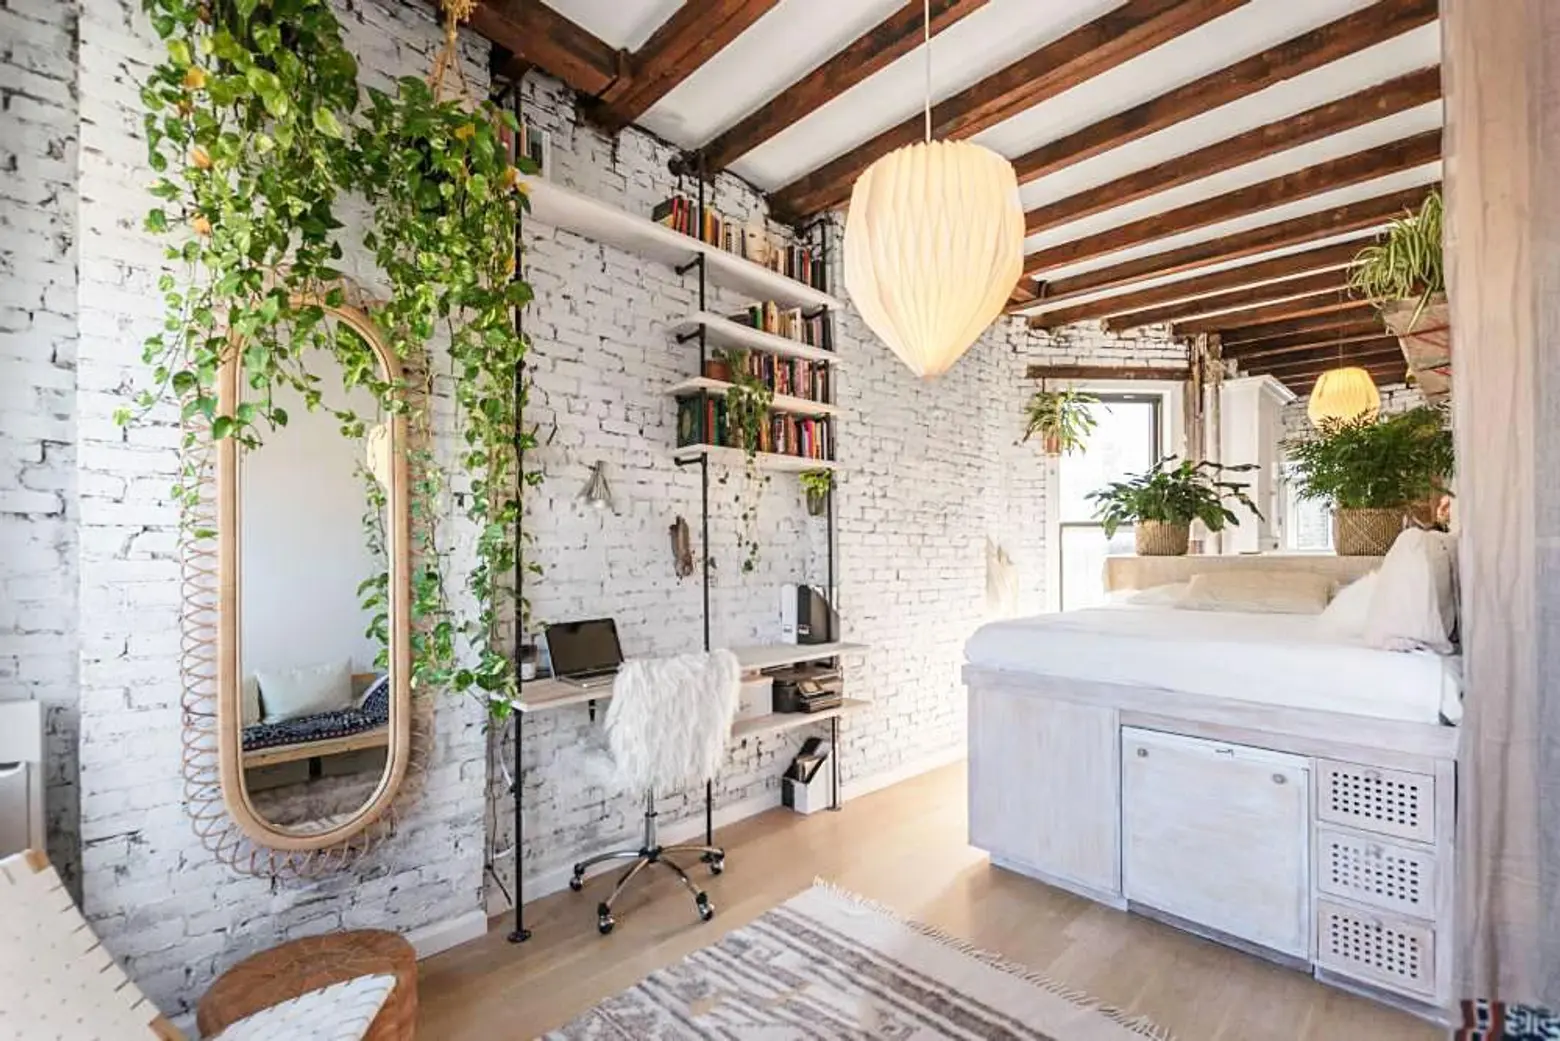 Dreamy furnished studio with lots of greenery asks $3,200/month in the East Village